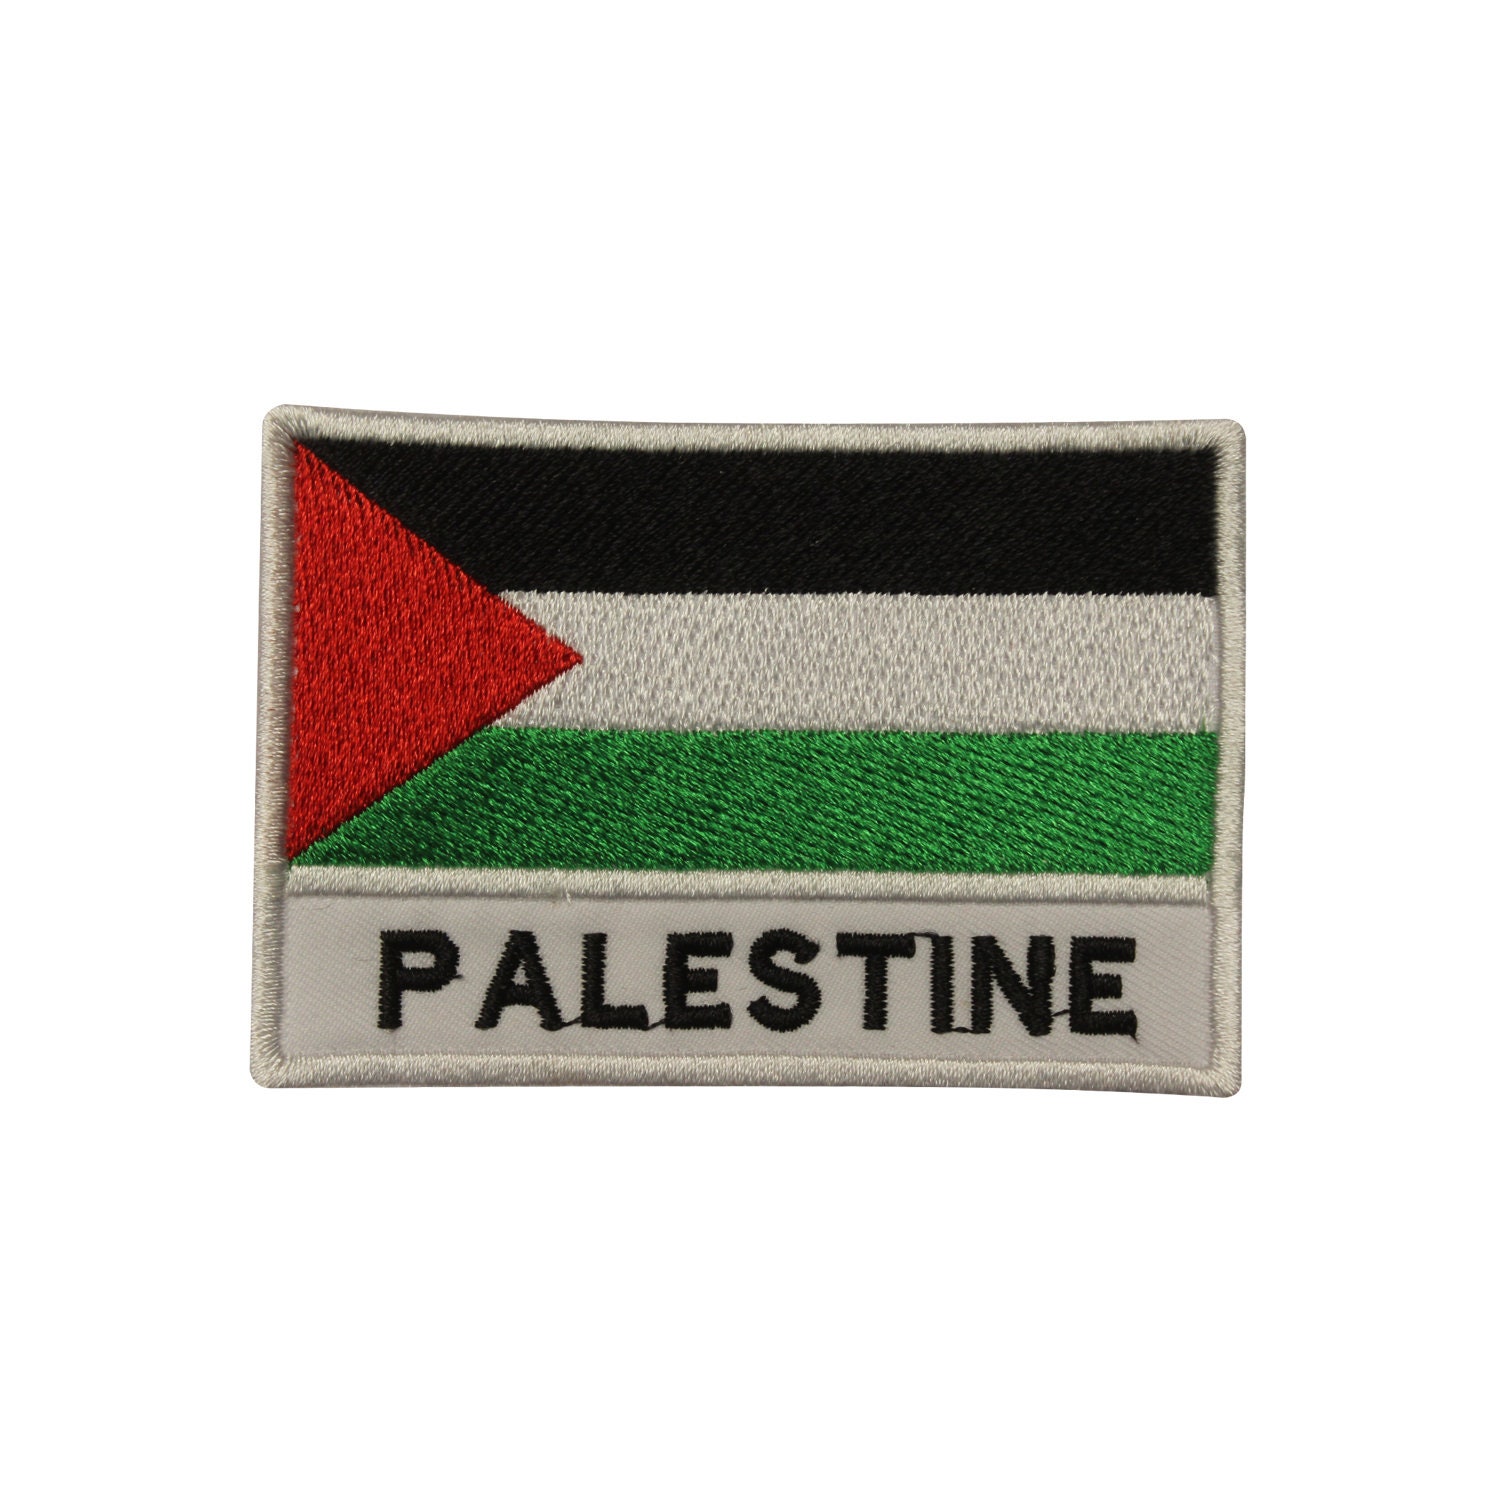 Palestine Embroidered Flag Iron on Sew on Patch Badge HIGH QUALITY 